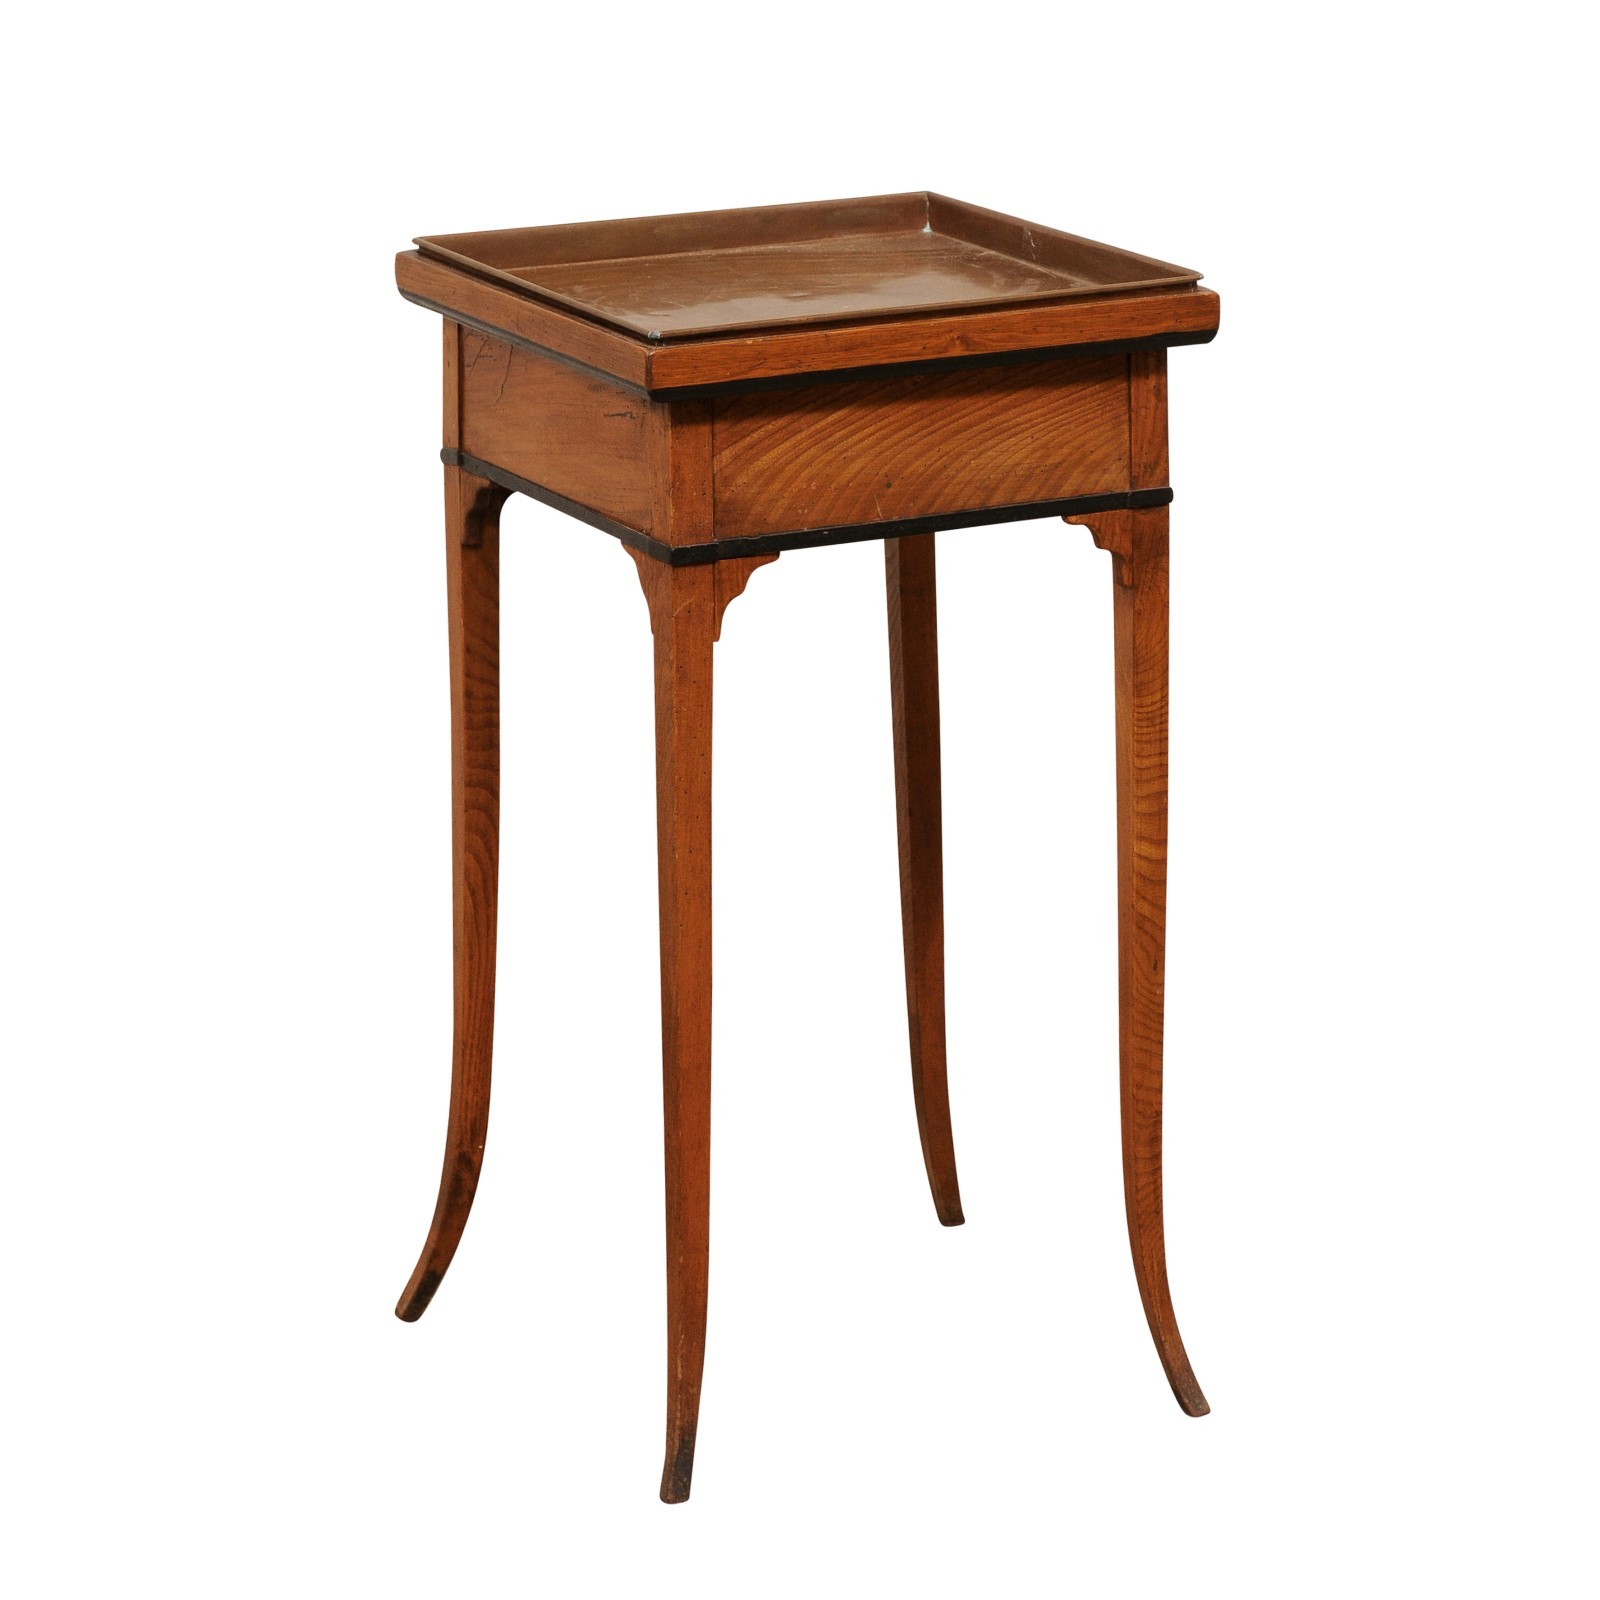 Swedish 19th C. Side Table with Copper Tray